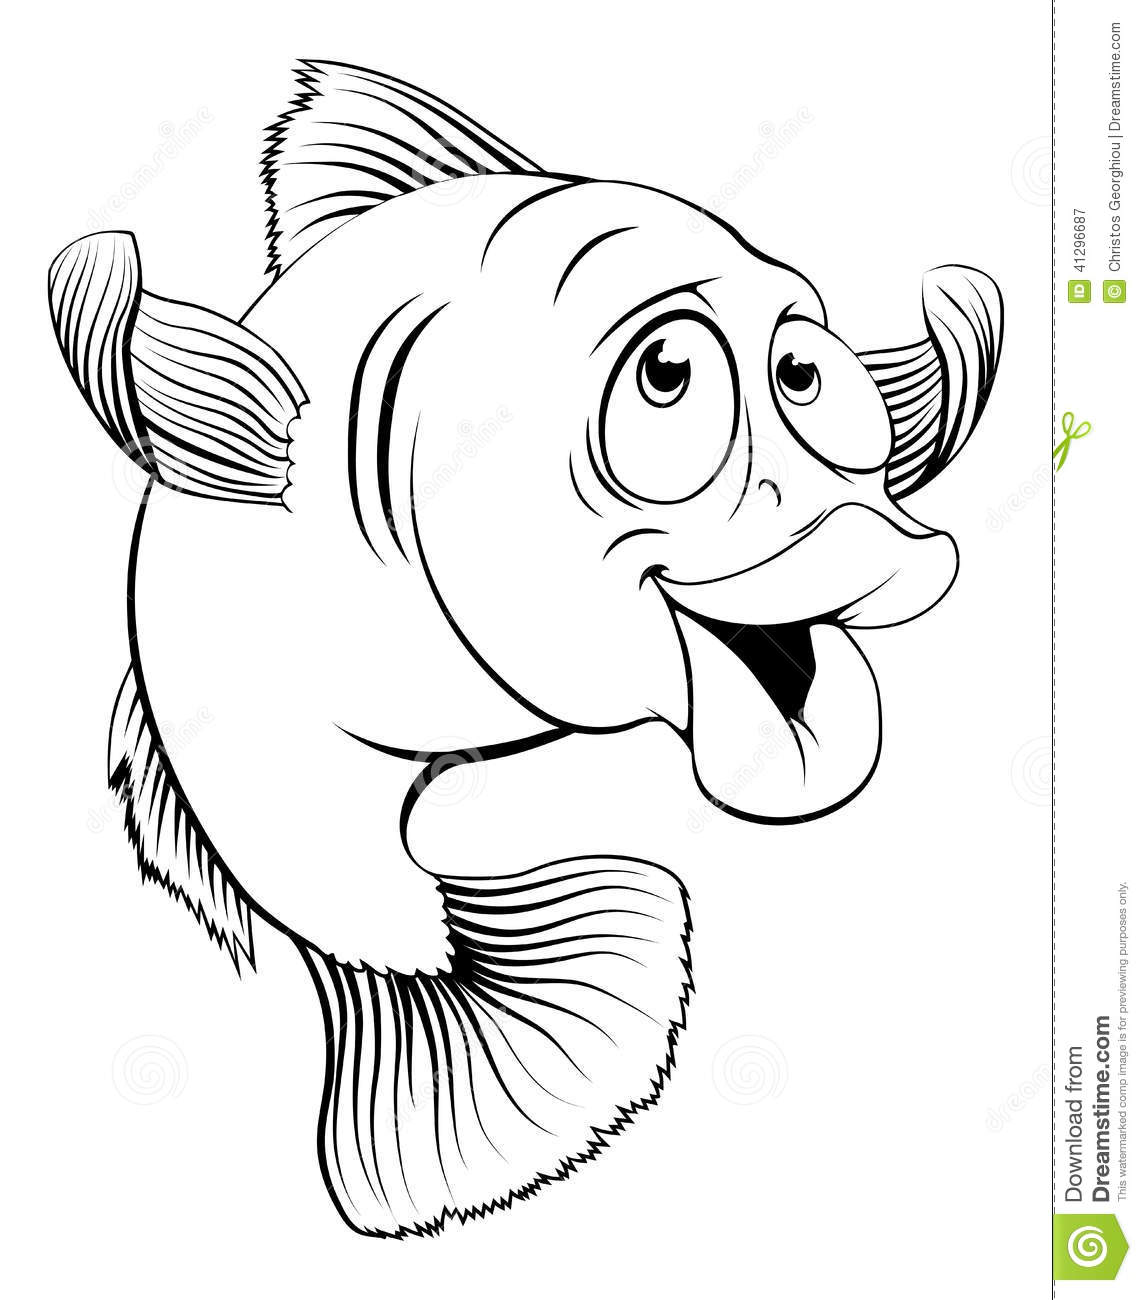 An Illustration Of A Happy Cute Cartoon Cod Fish In Black And White